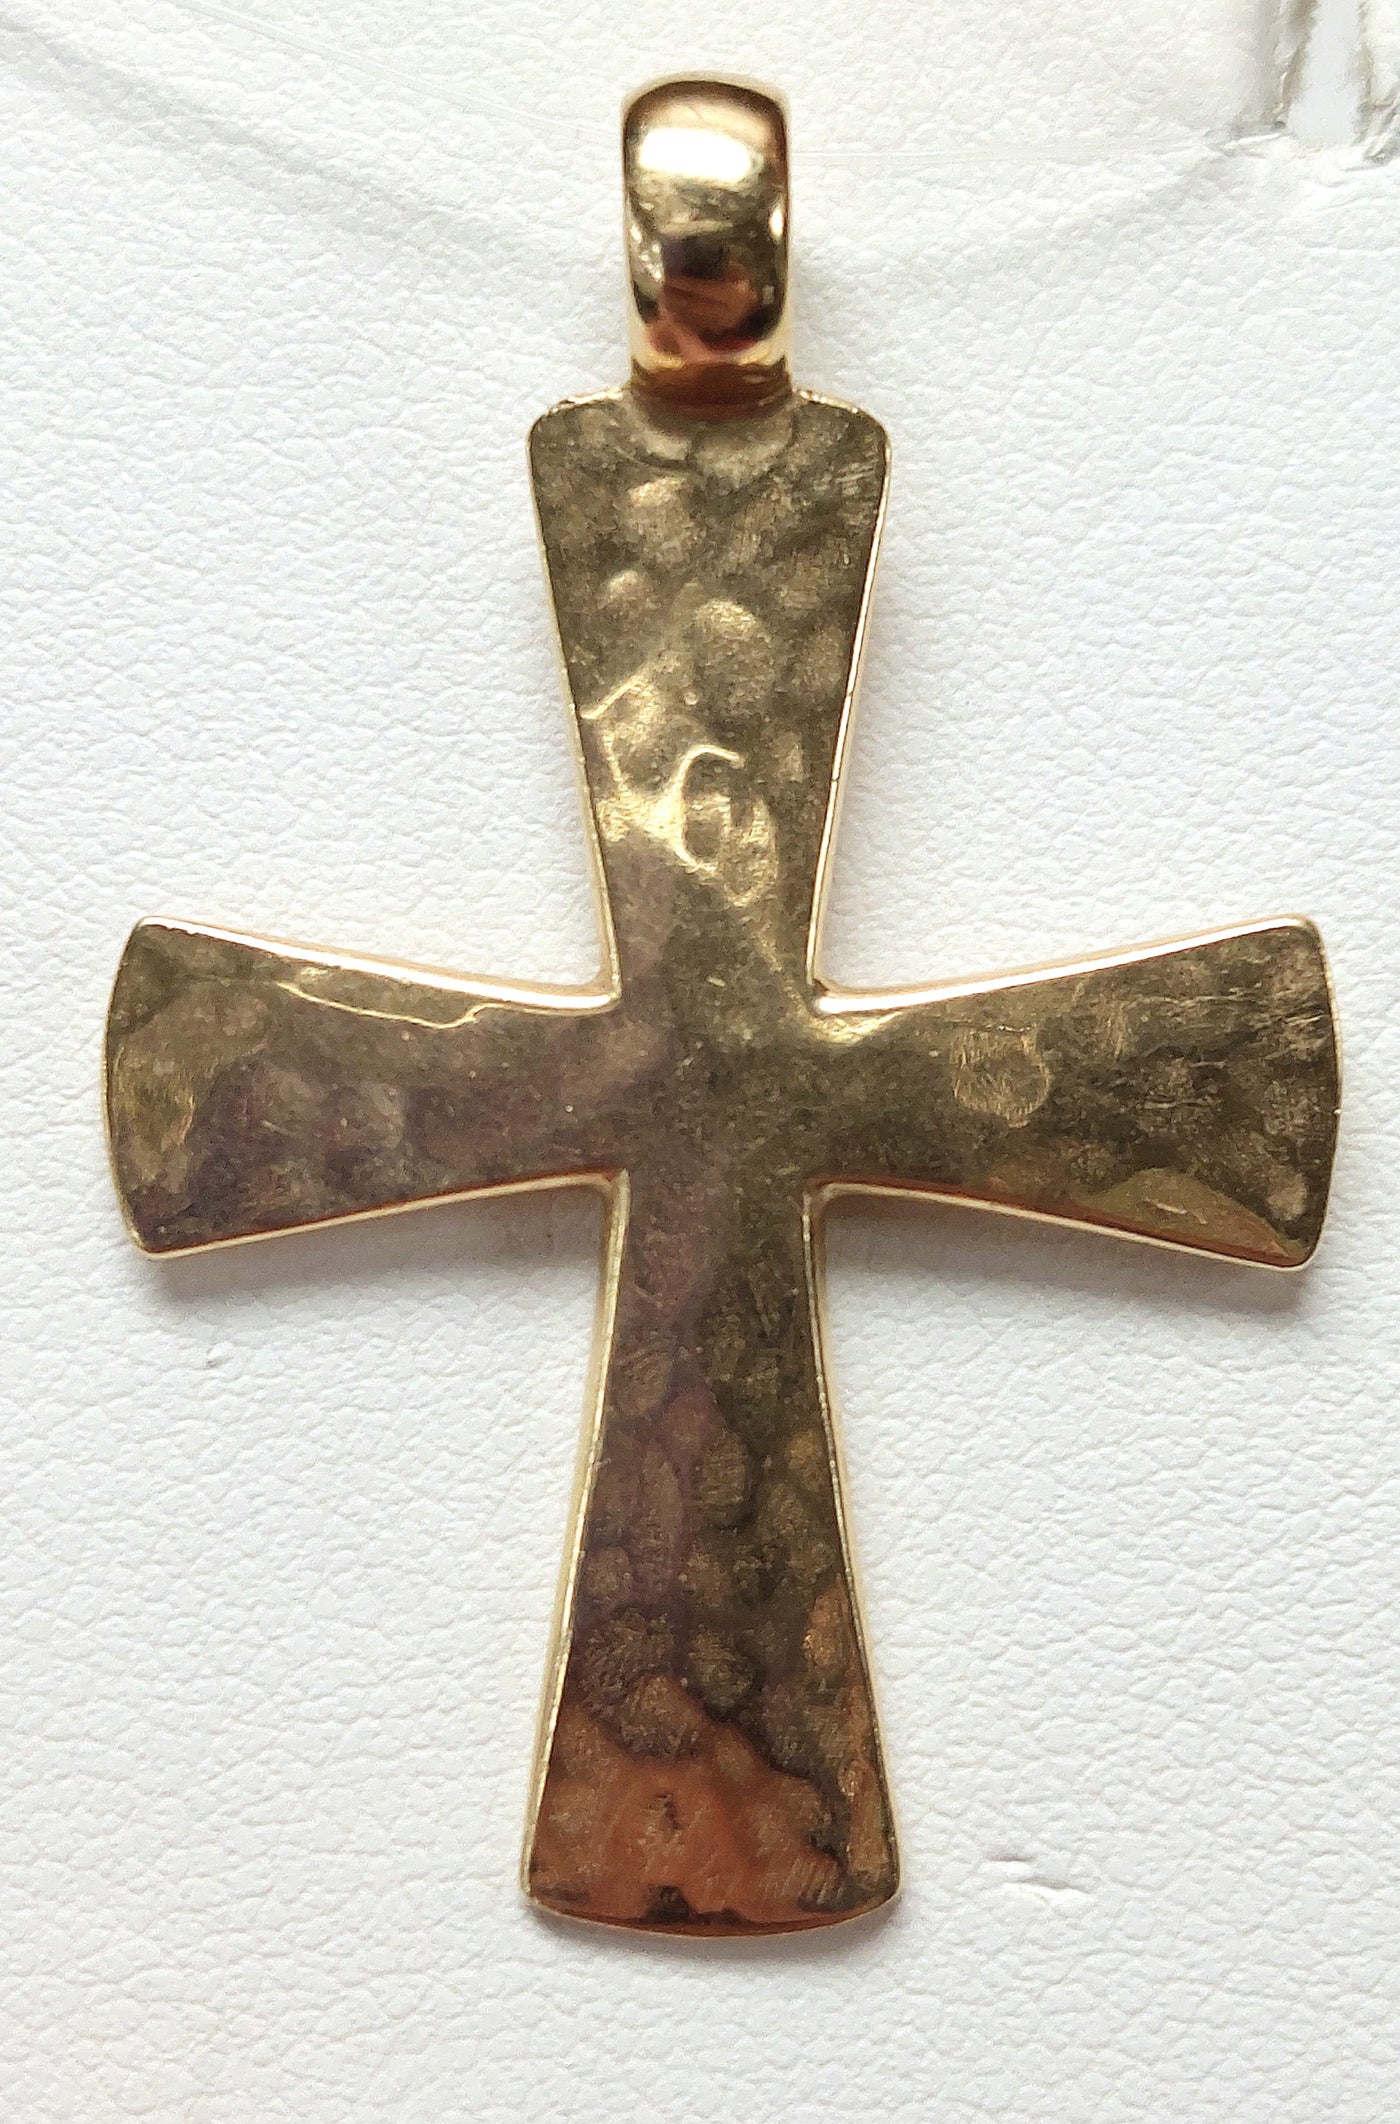 Hammered Cut-out Cross Charms, Antique Gold (10)